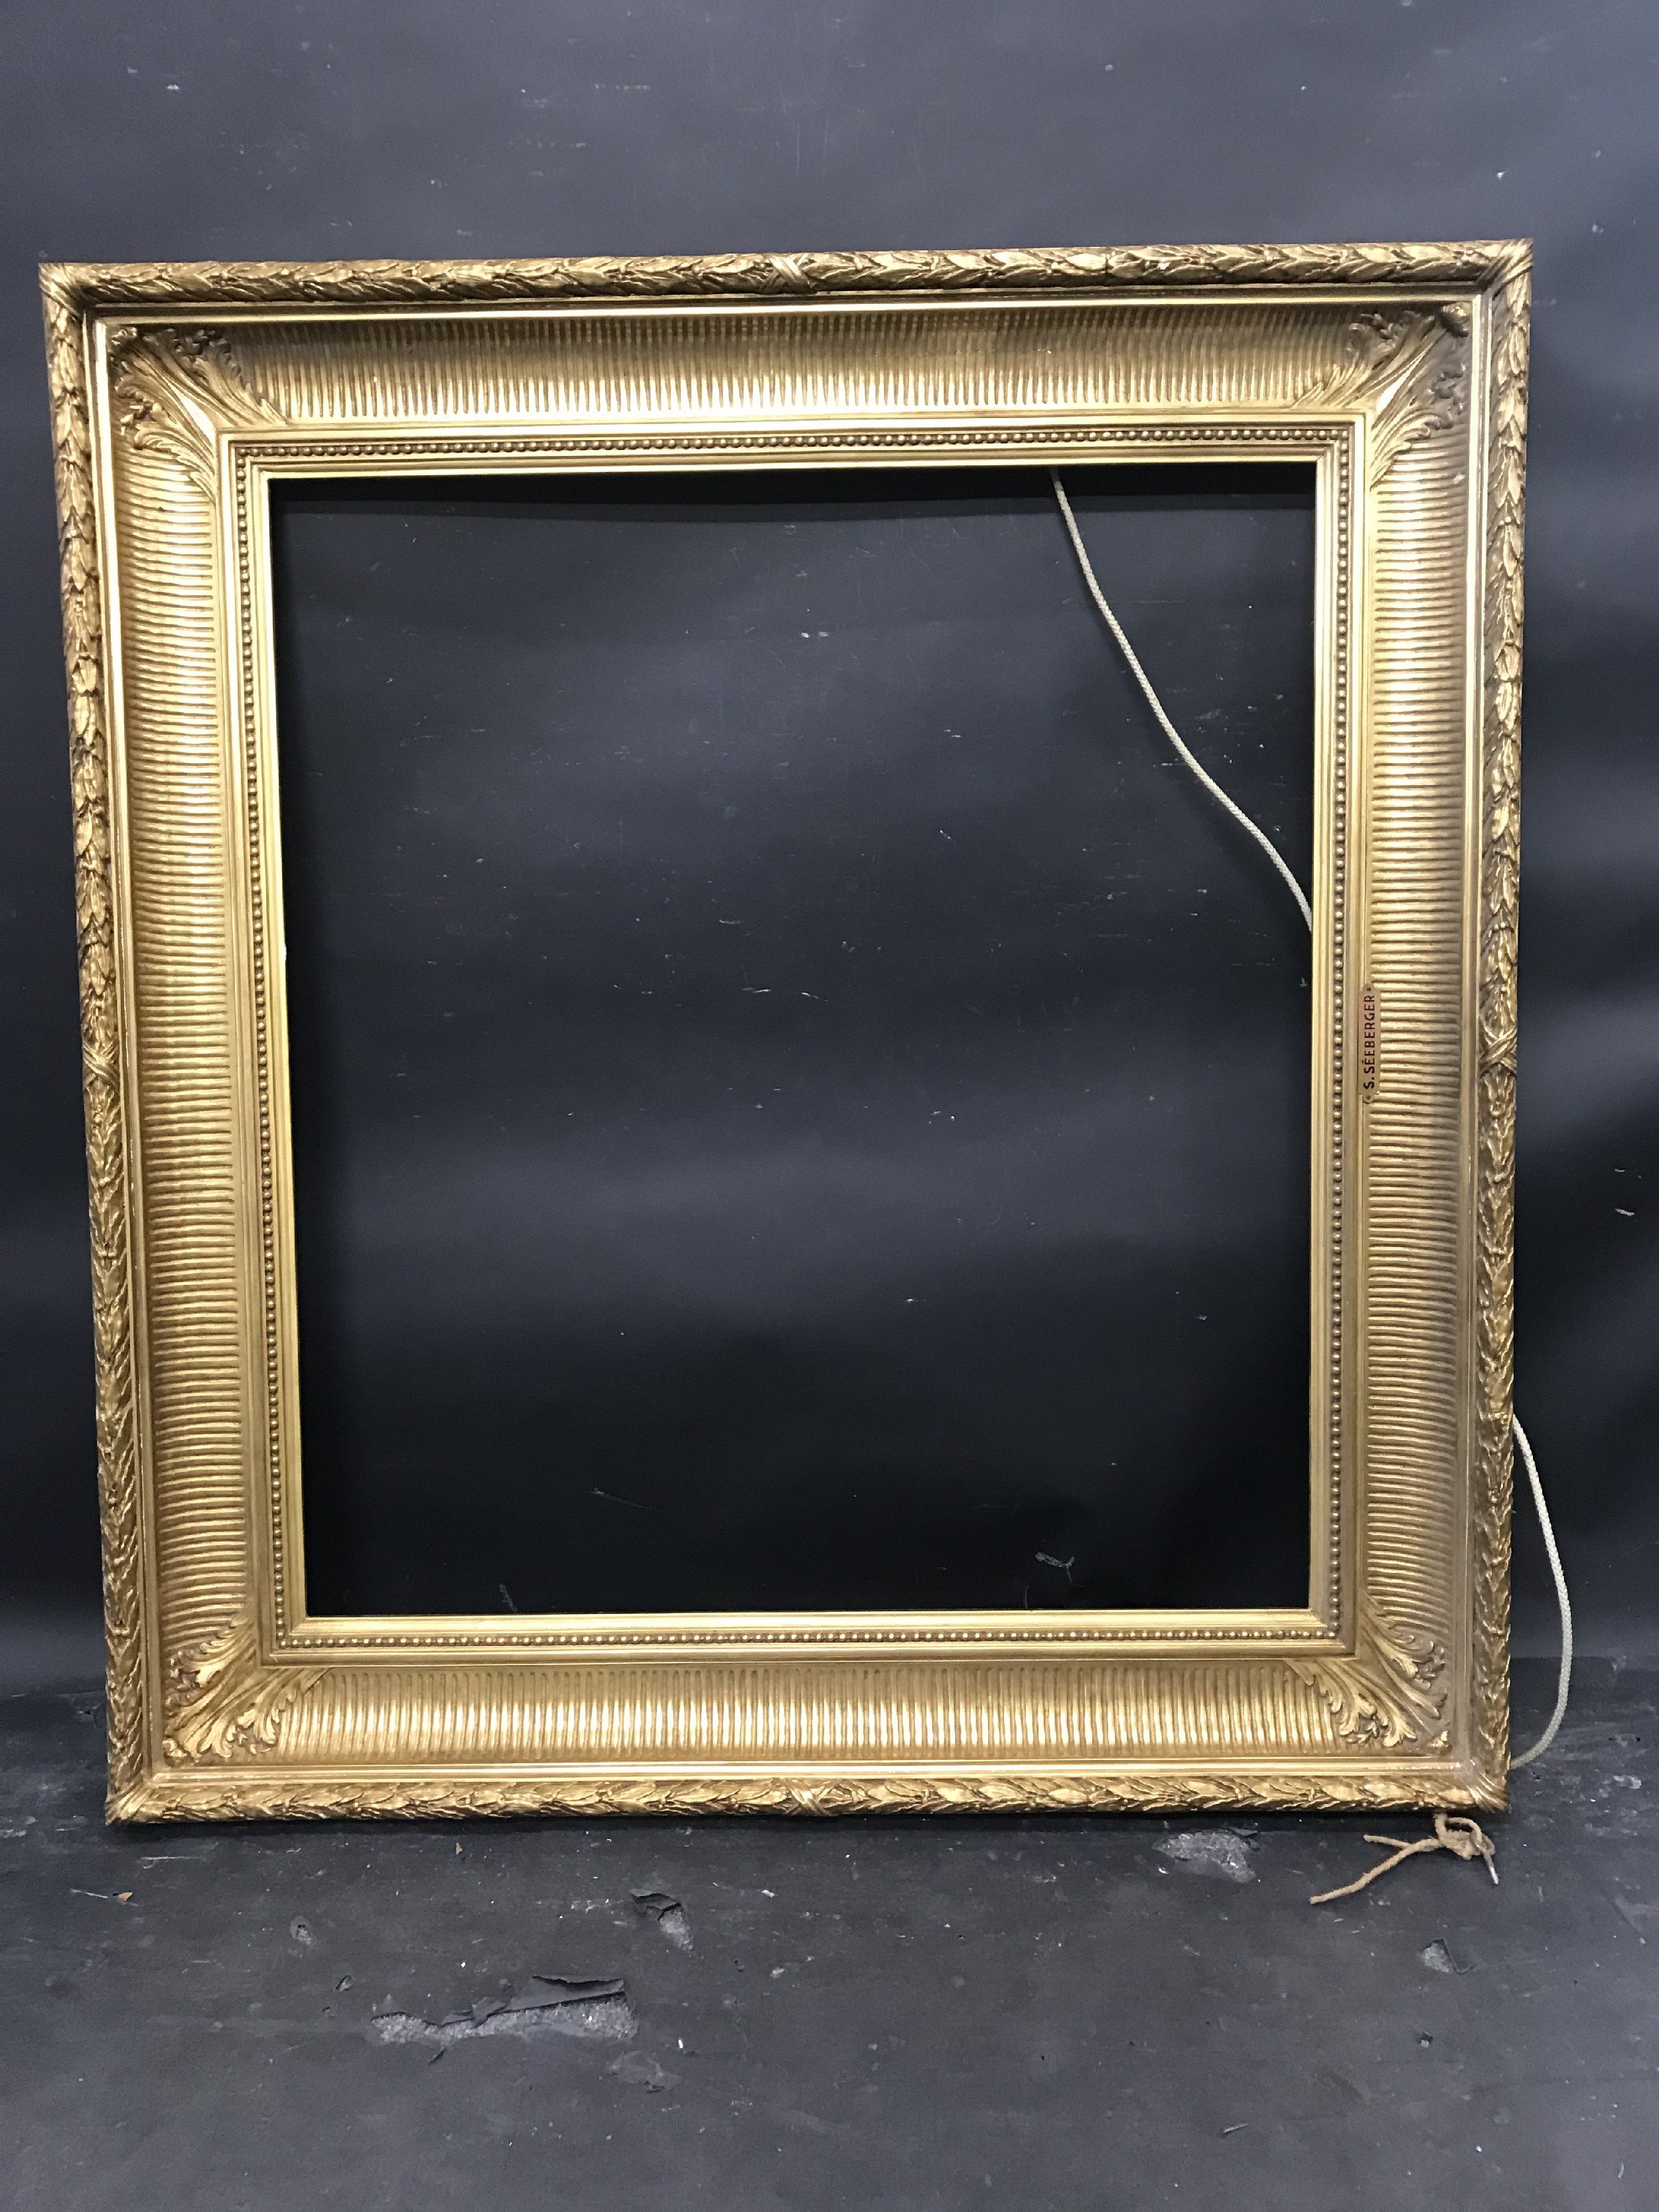 19th Century English School. A Gilt Composition Frame, 31.5" x 28.5" (rebate). - Image 2 of 3